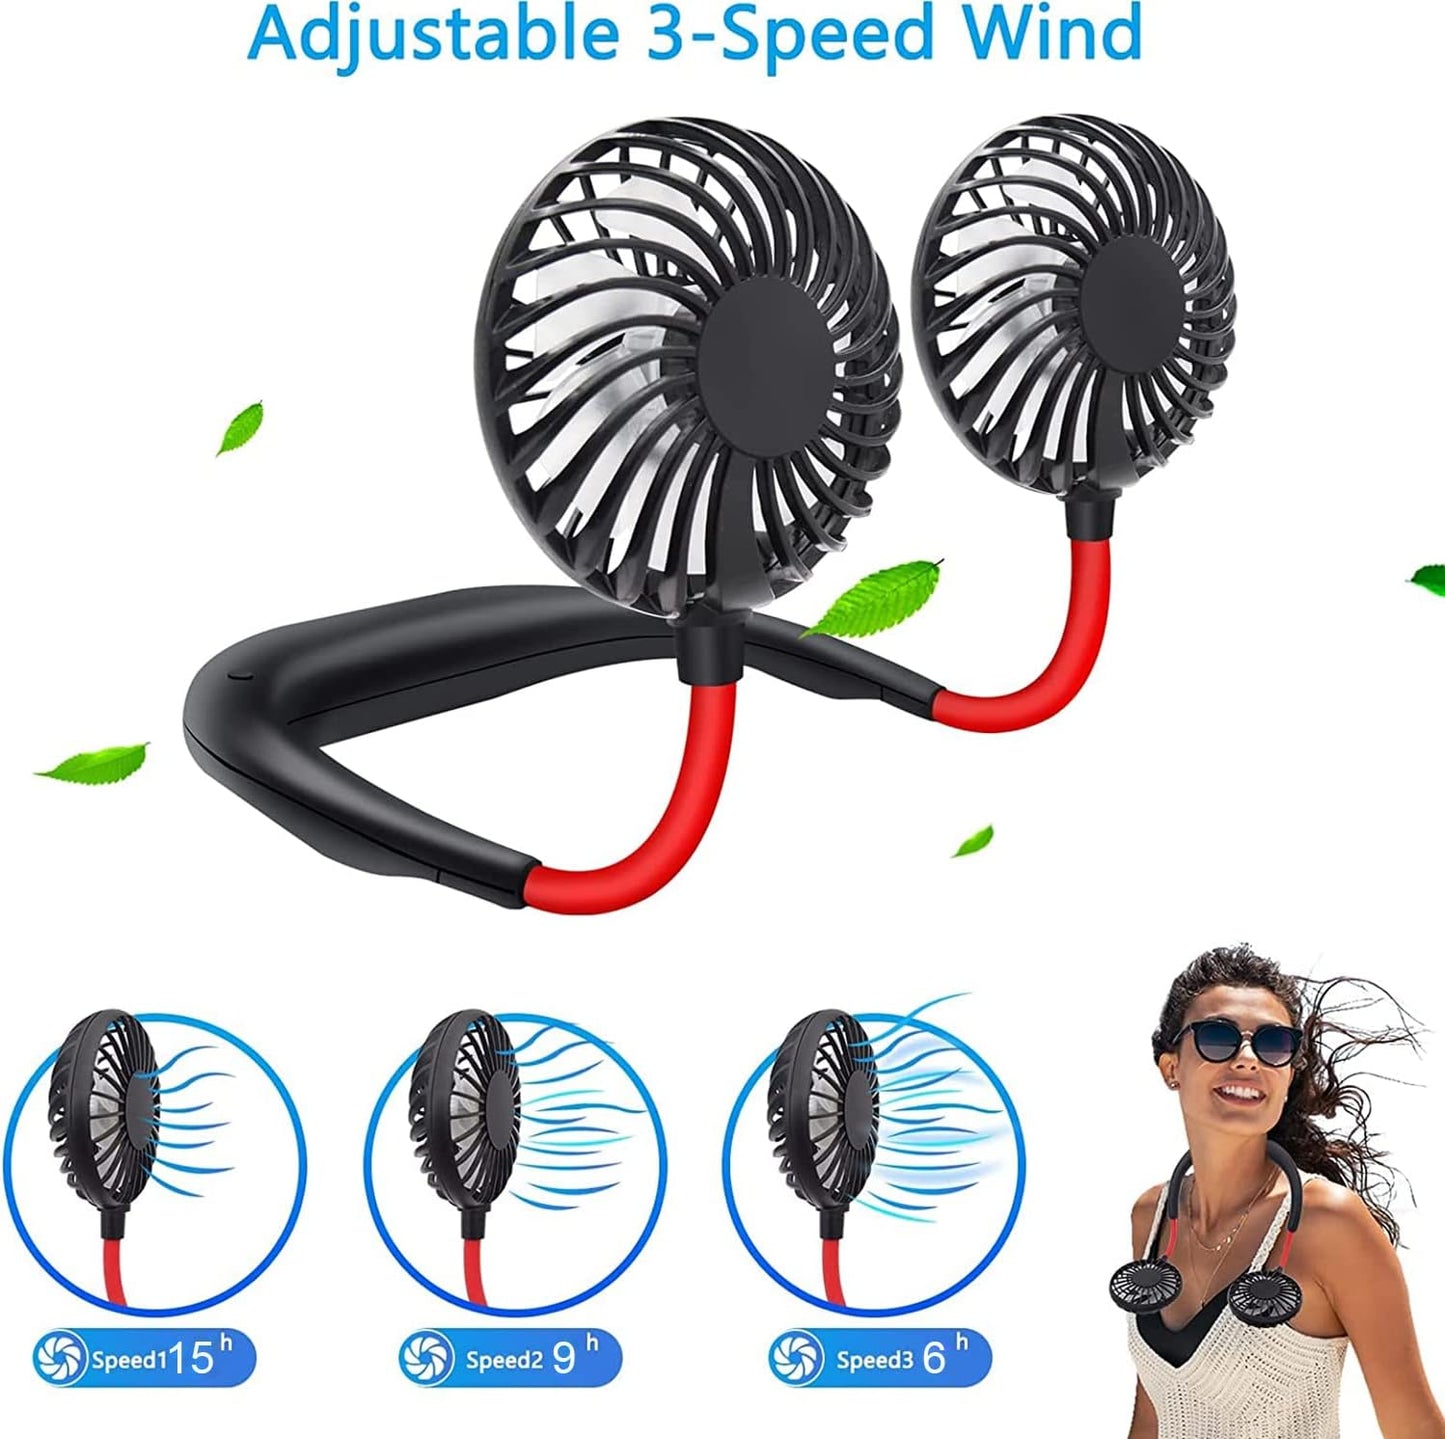 JIAHAIYU Neck Fan Portable Face Fan Personal USB Hands-Free Mini Wearable Sports Handheld Cooling Small New Fans Around Your Neck for Travel Office Room Household Outdoor, 300*190